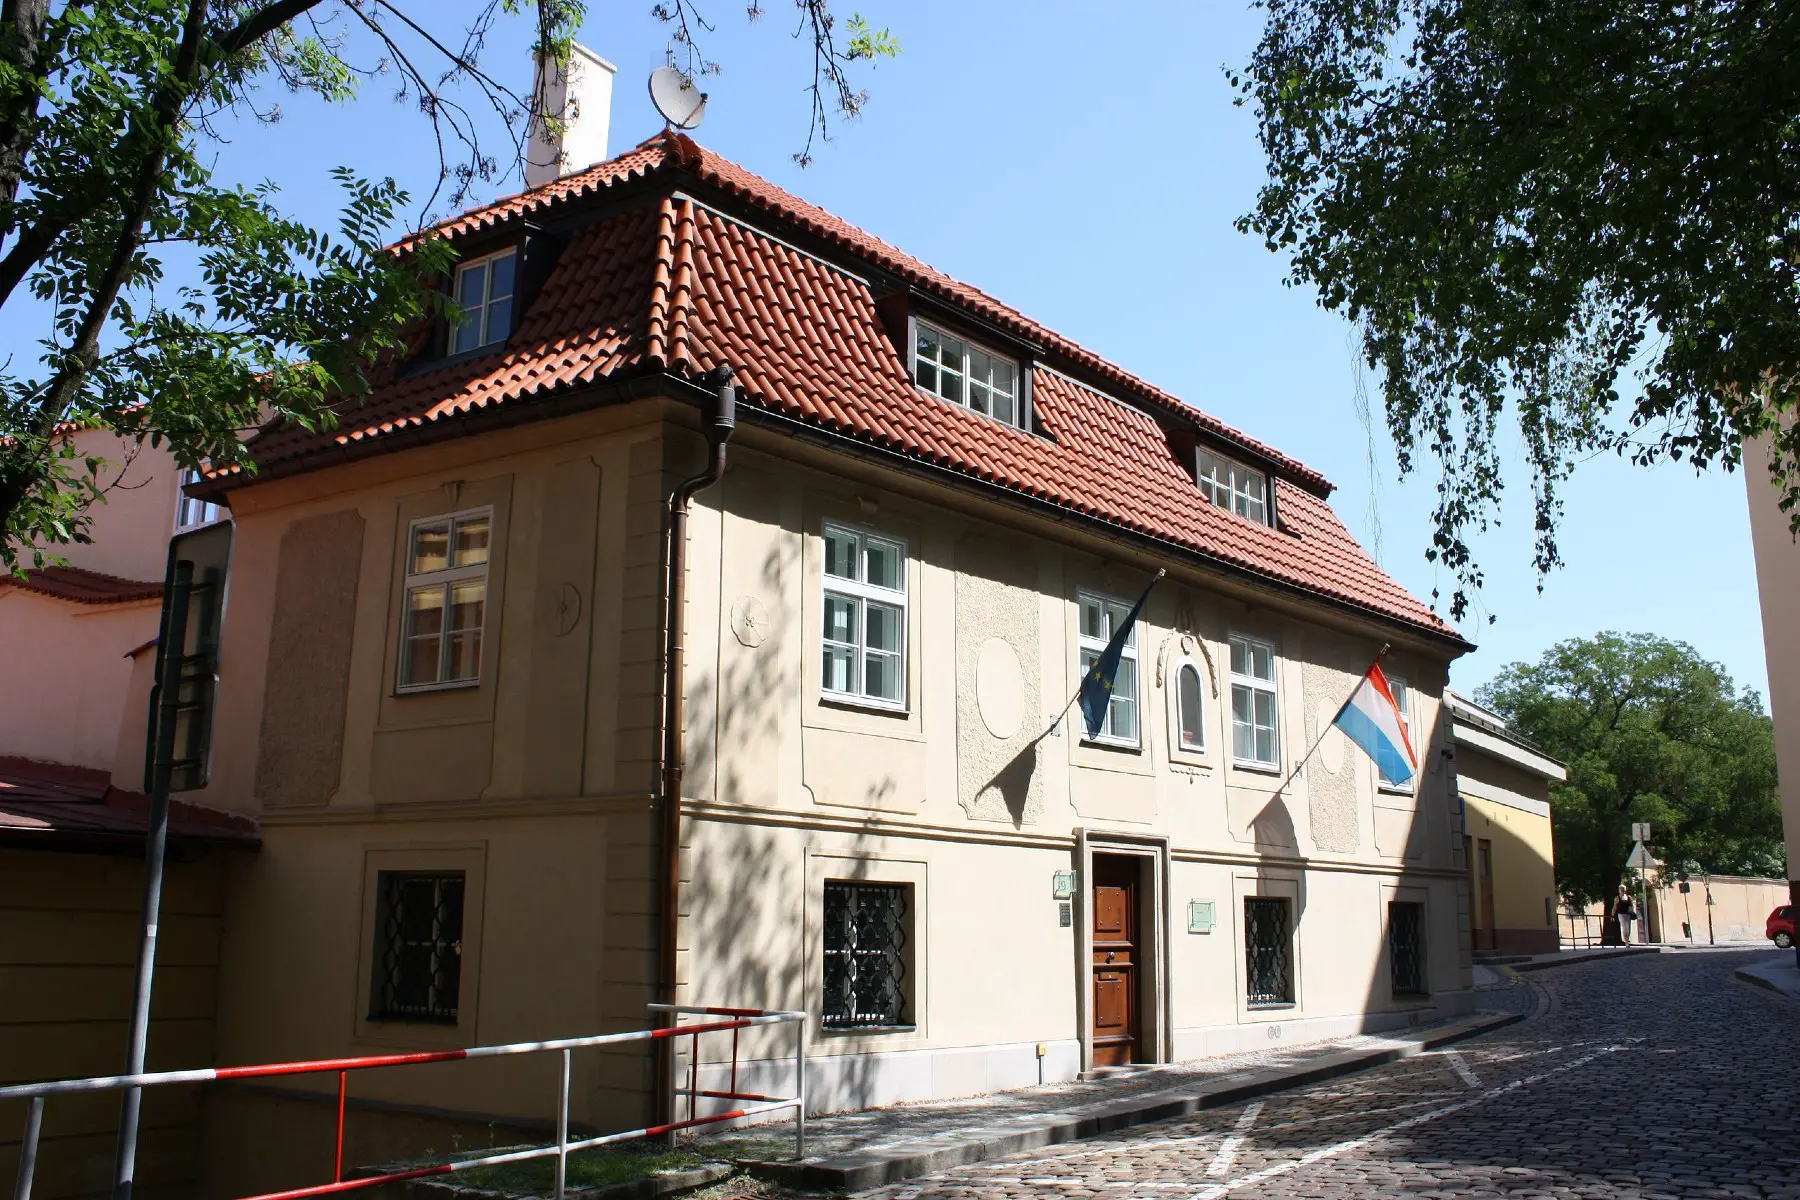 The Embassy of Luxembourg in Prague, Czechia.